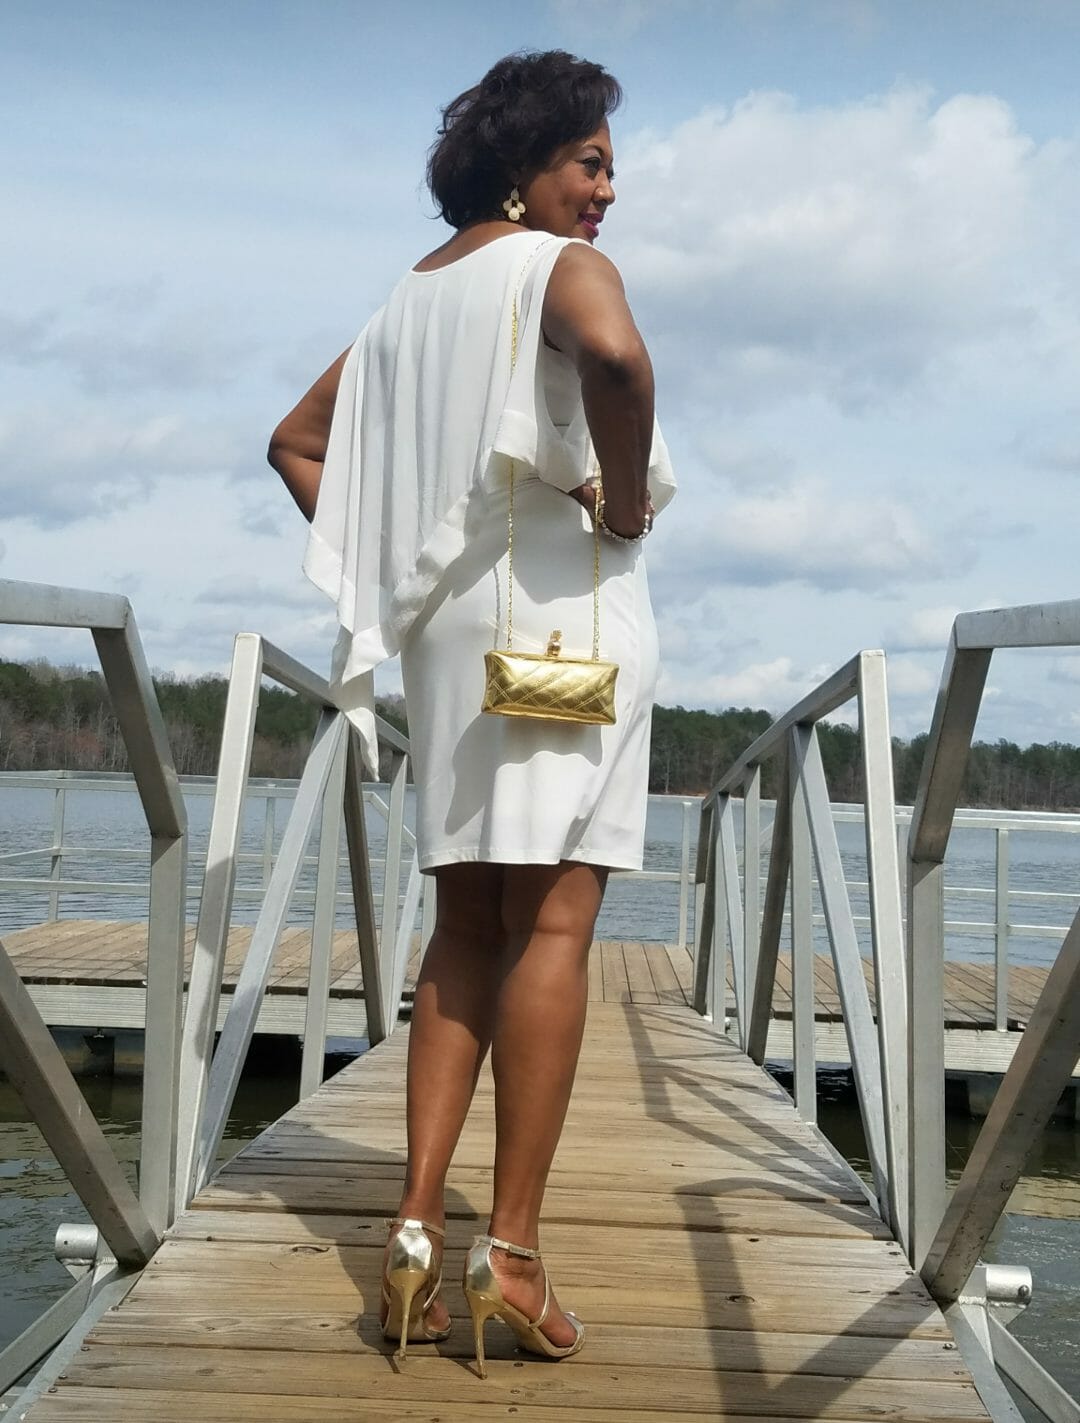 Back view of a Midnight Velvet customer on a pier, in a white dress with satin trim on the cape-like top, with a gold clutch.